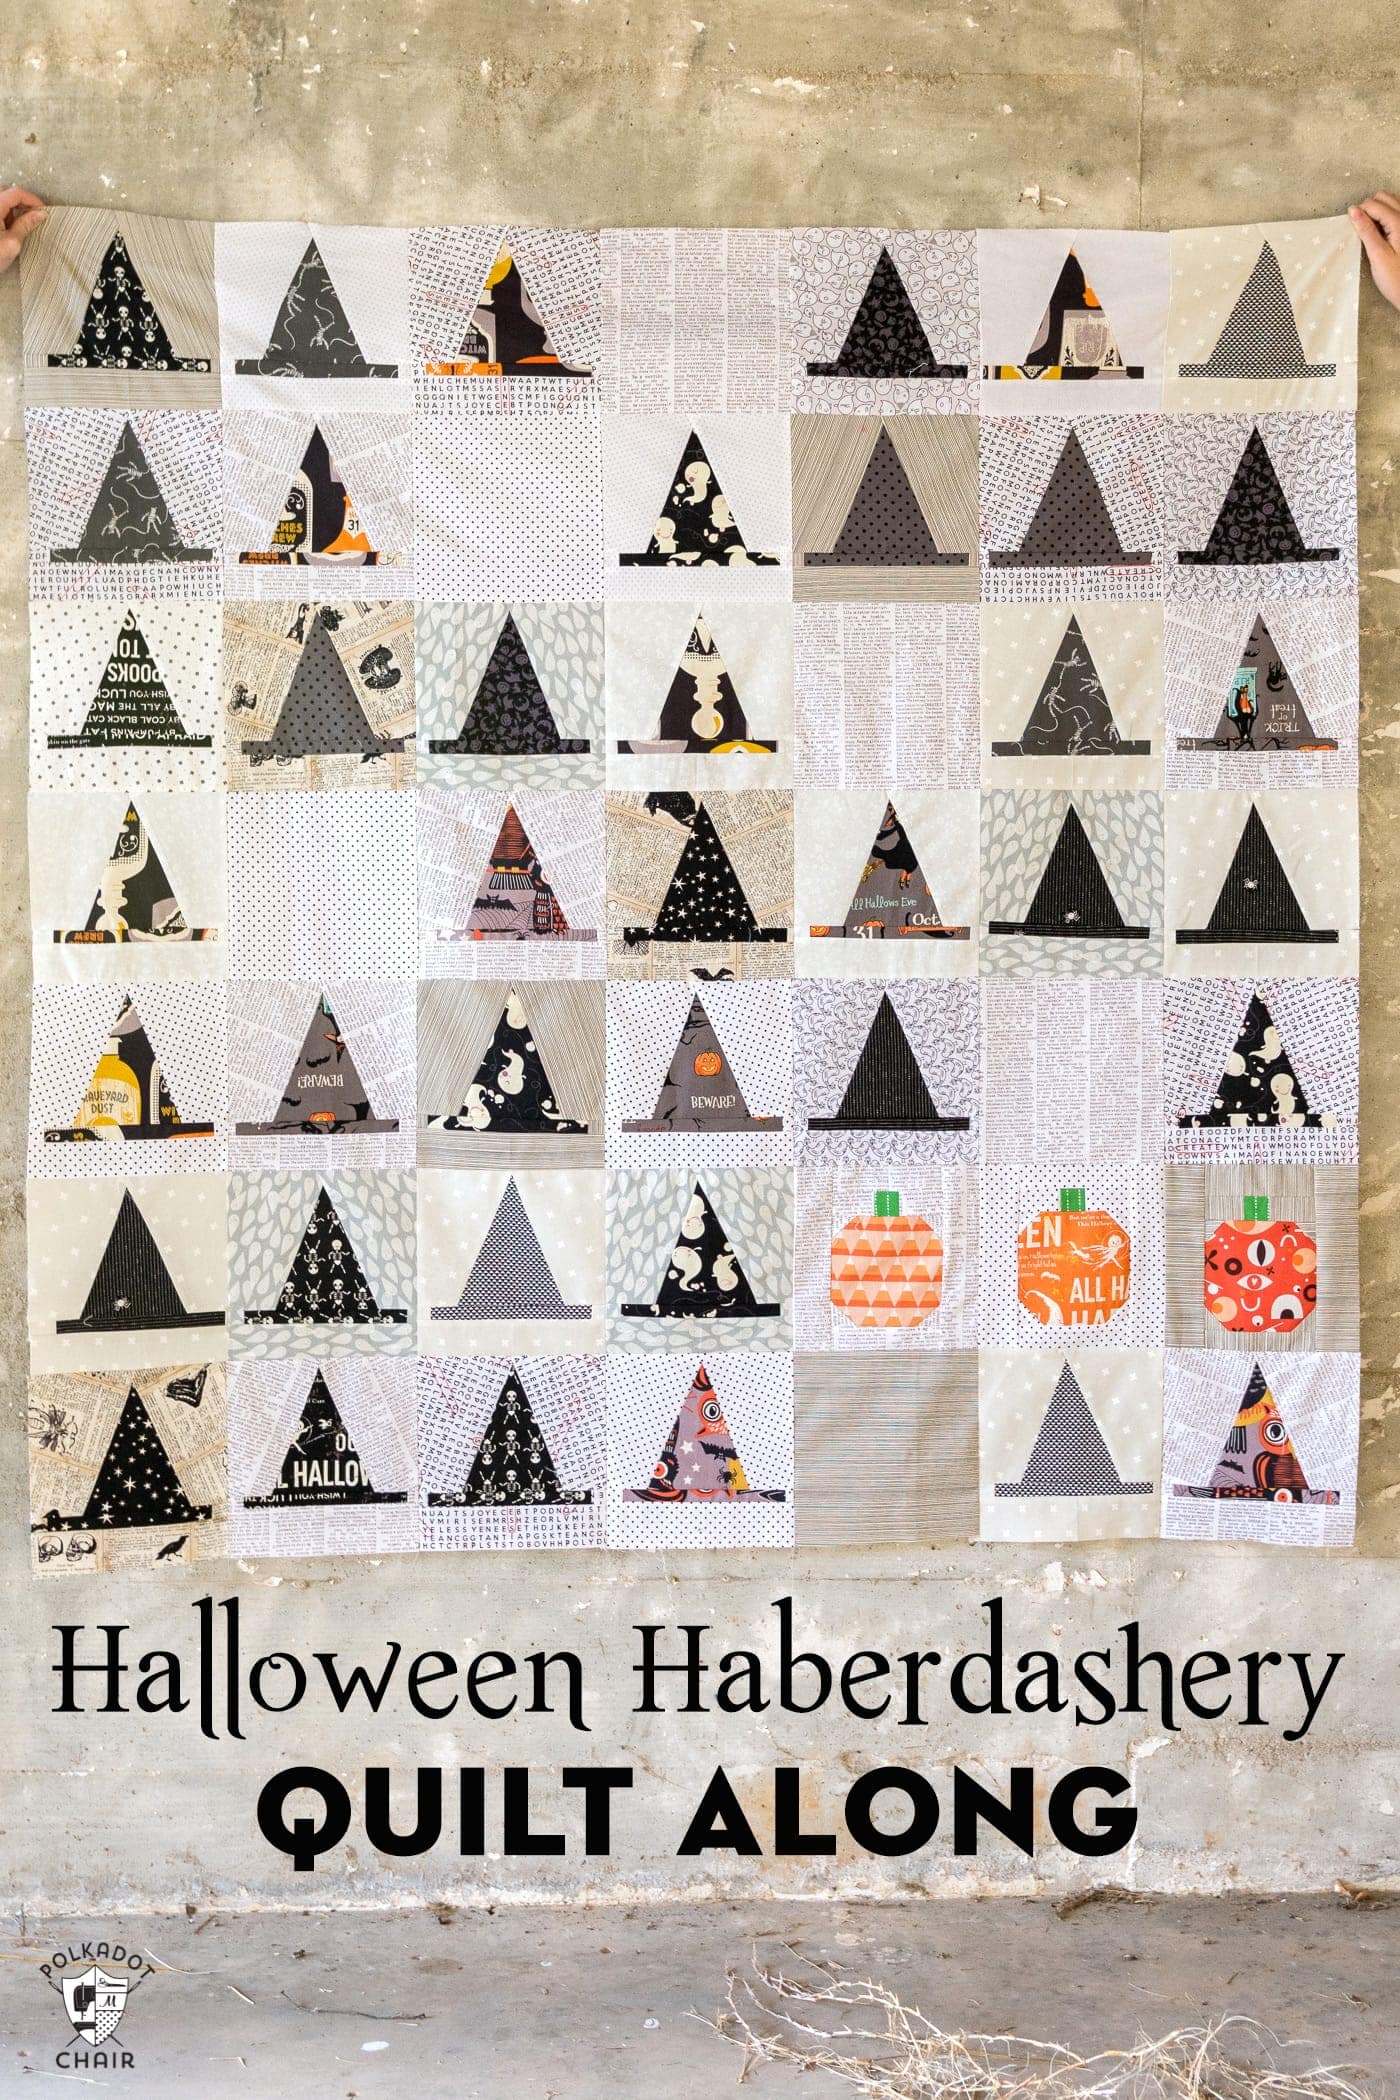 Join us for the Halloween Haberdashery Quilt Along